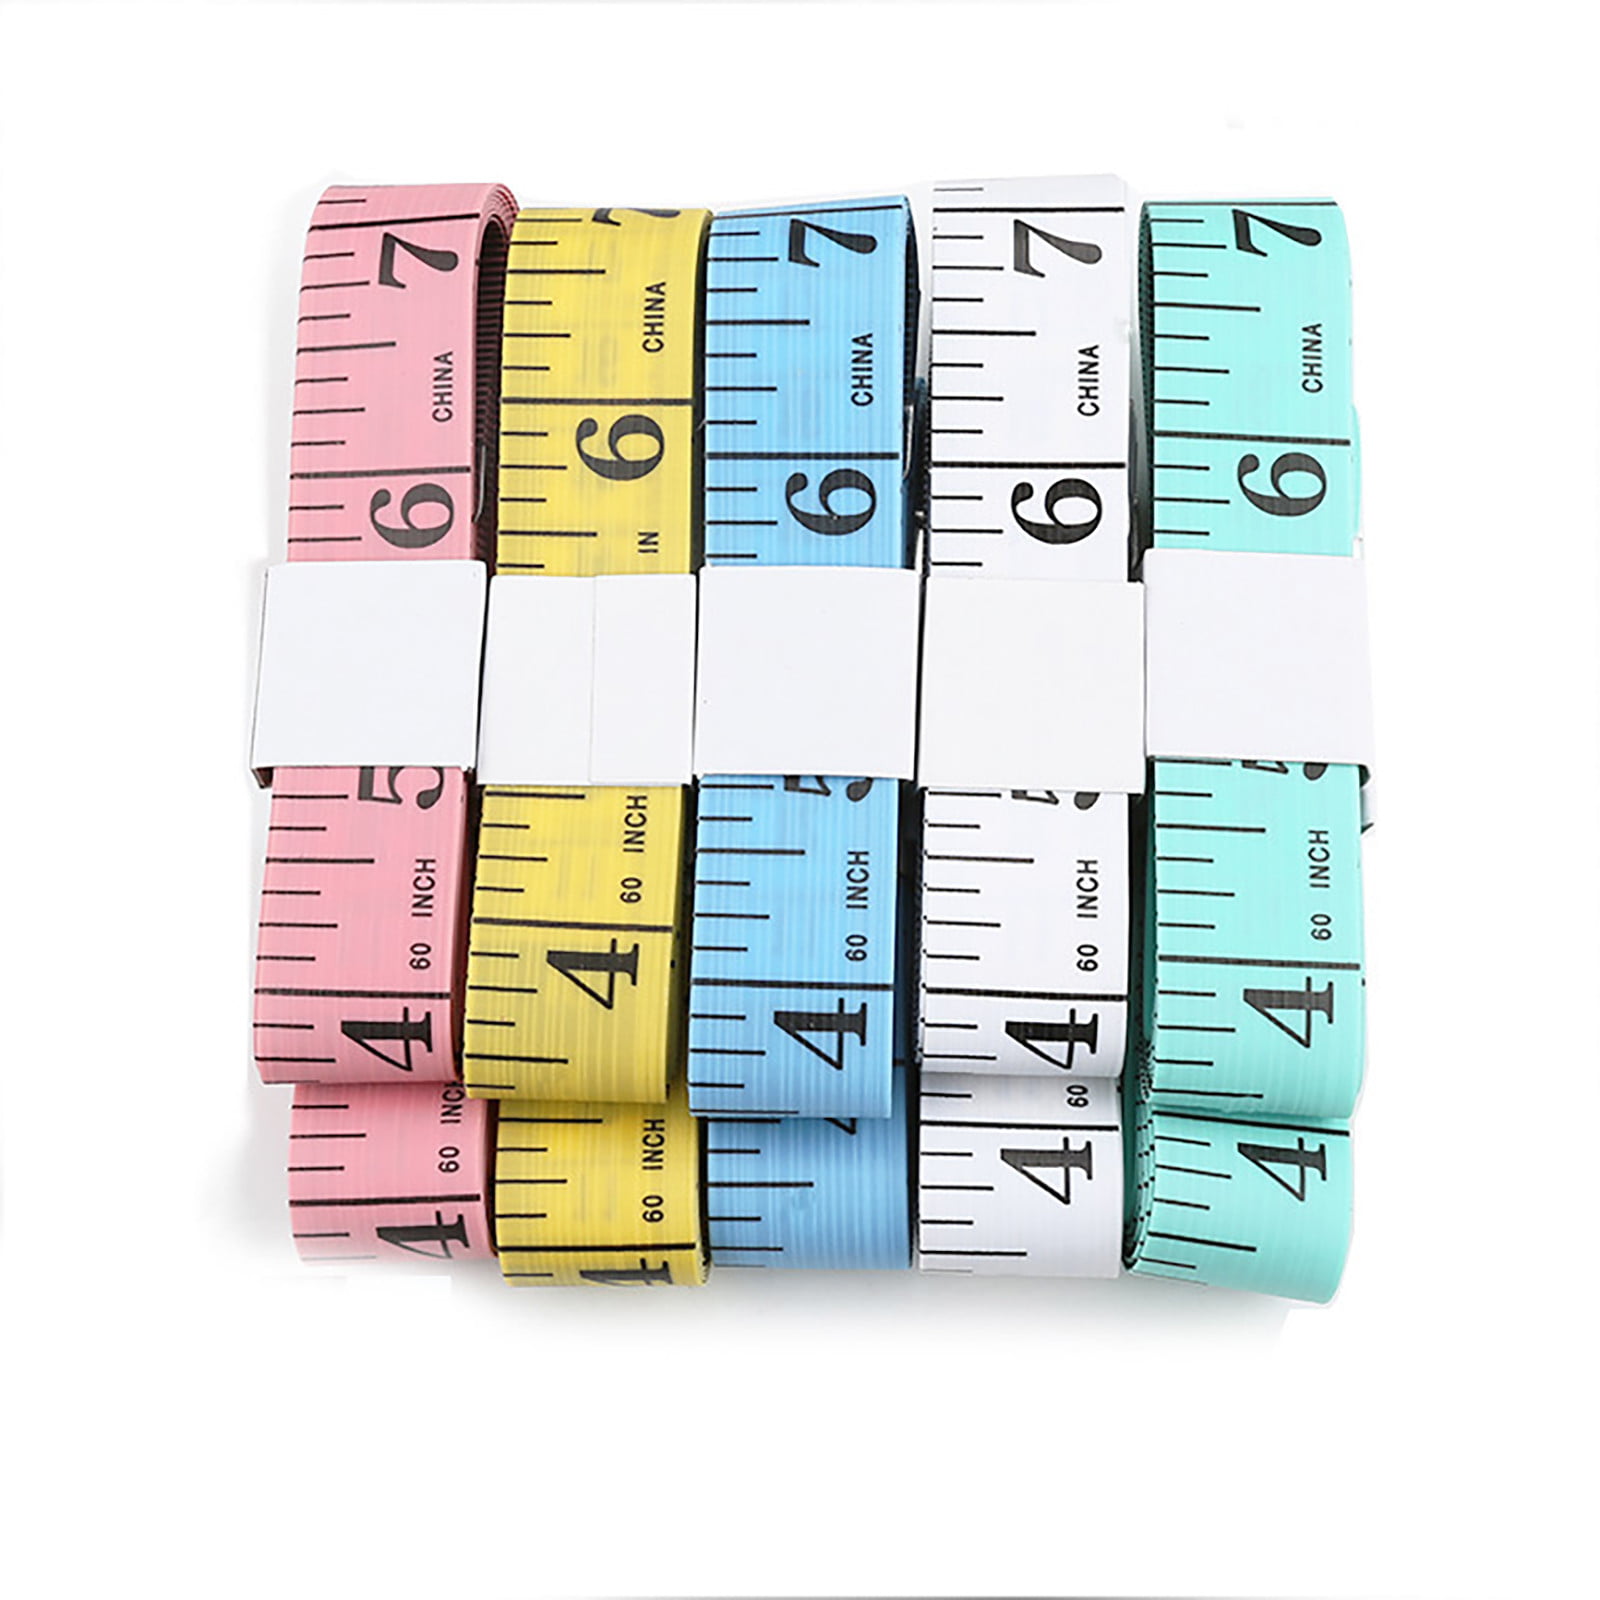 DIY Tailor's Clothing Measuring Tape Inch Cloth Ruler Soft Tape 60  inch/300CM 